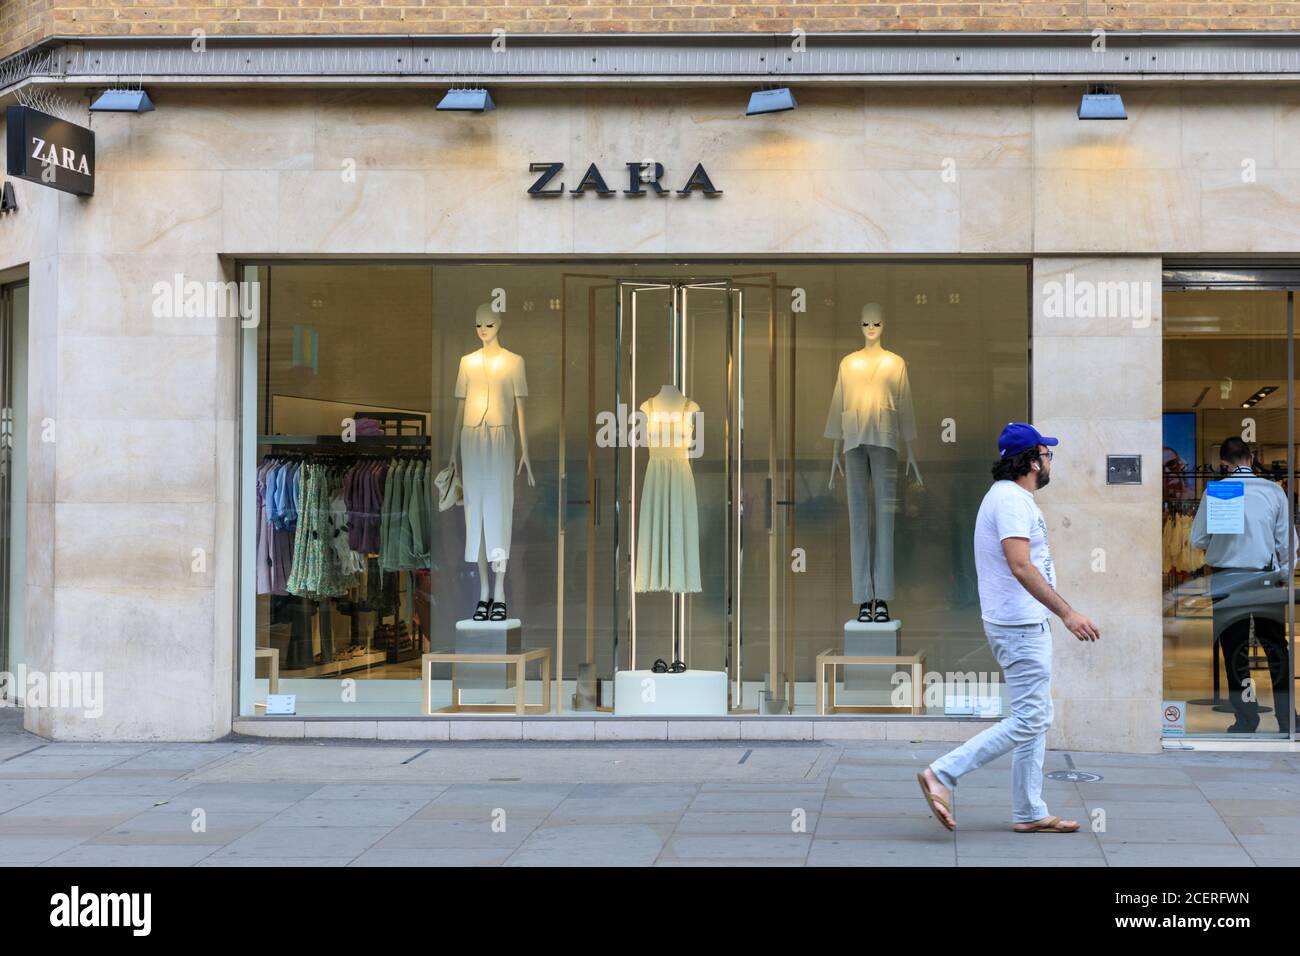 Zara Store Front High Resolution Stock Photography and Images - Alamy